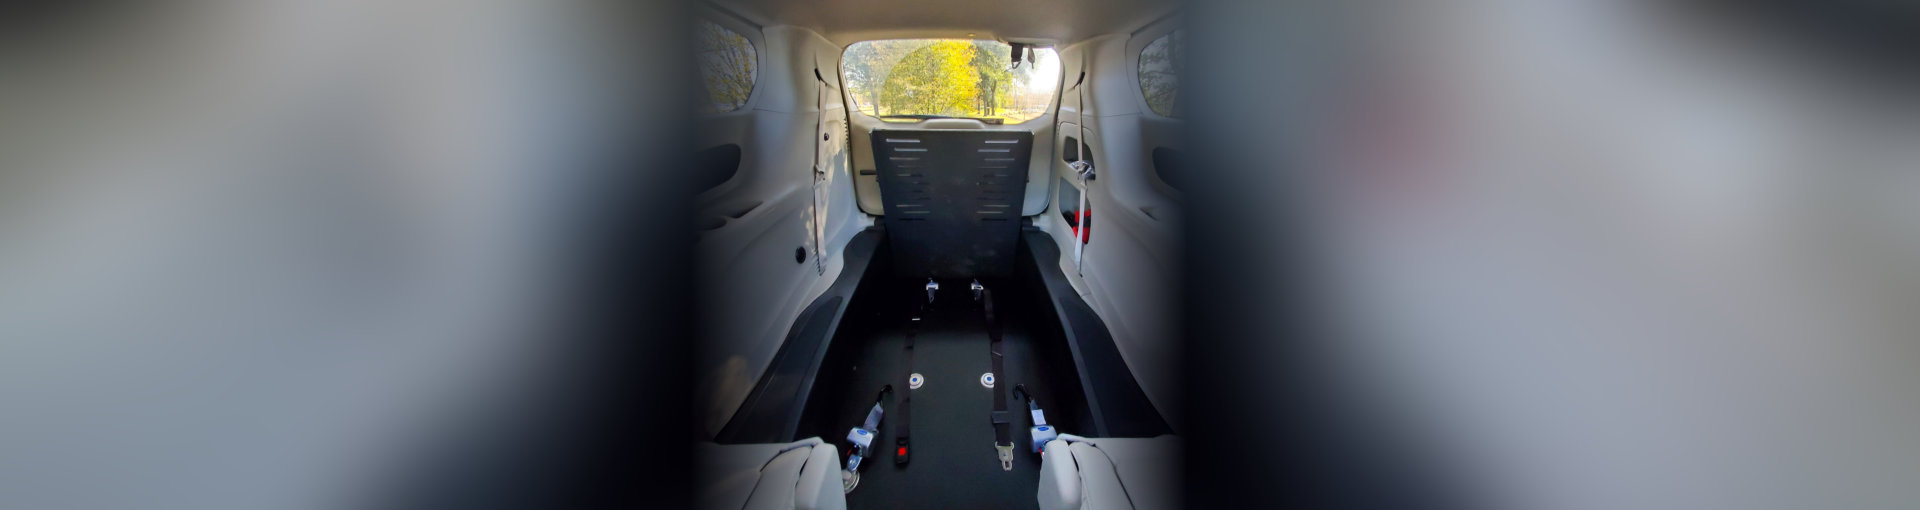 Interior of van that can transport wheelchair-sitted patient